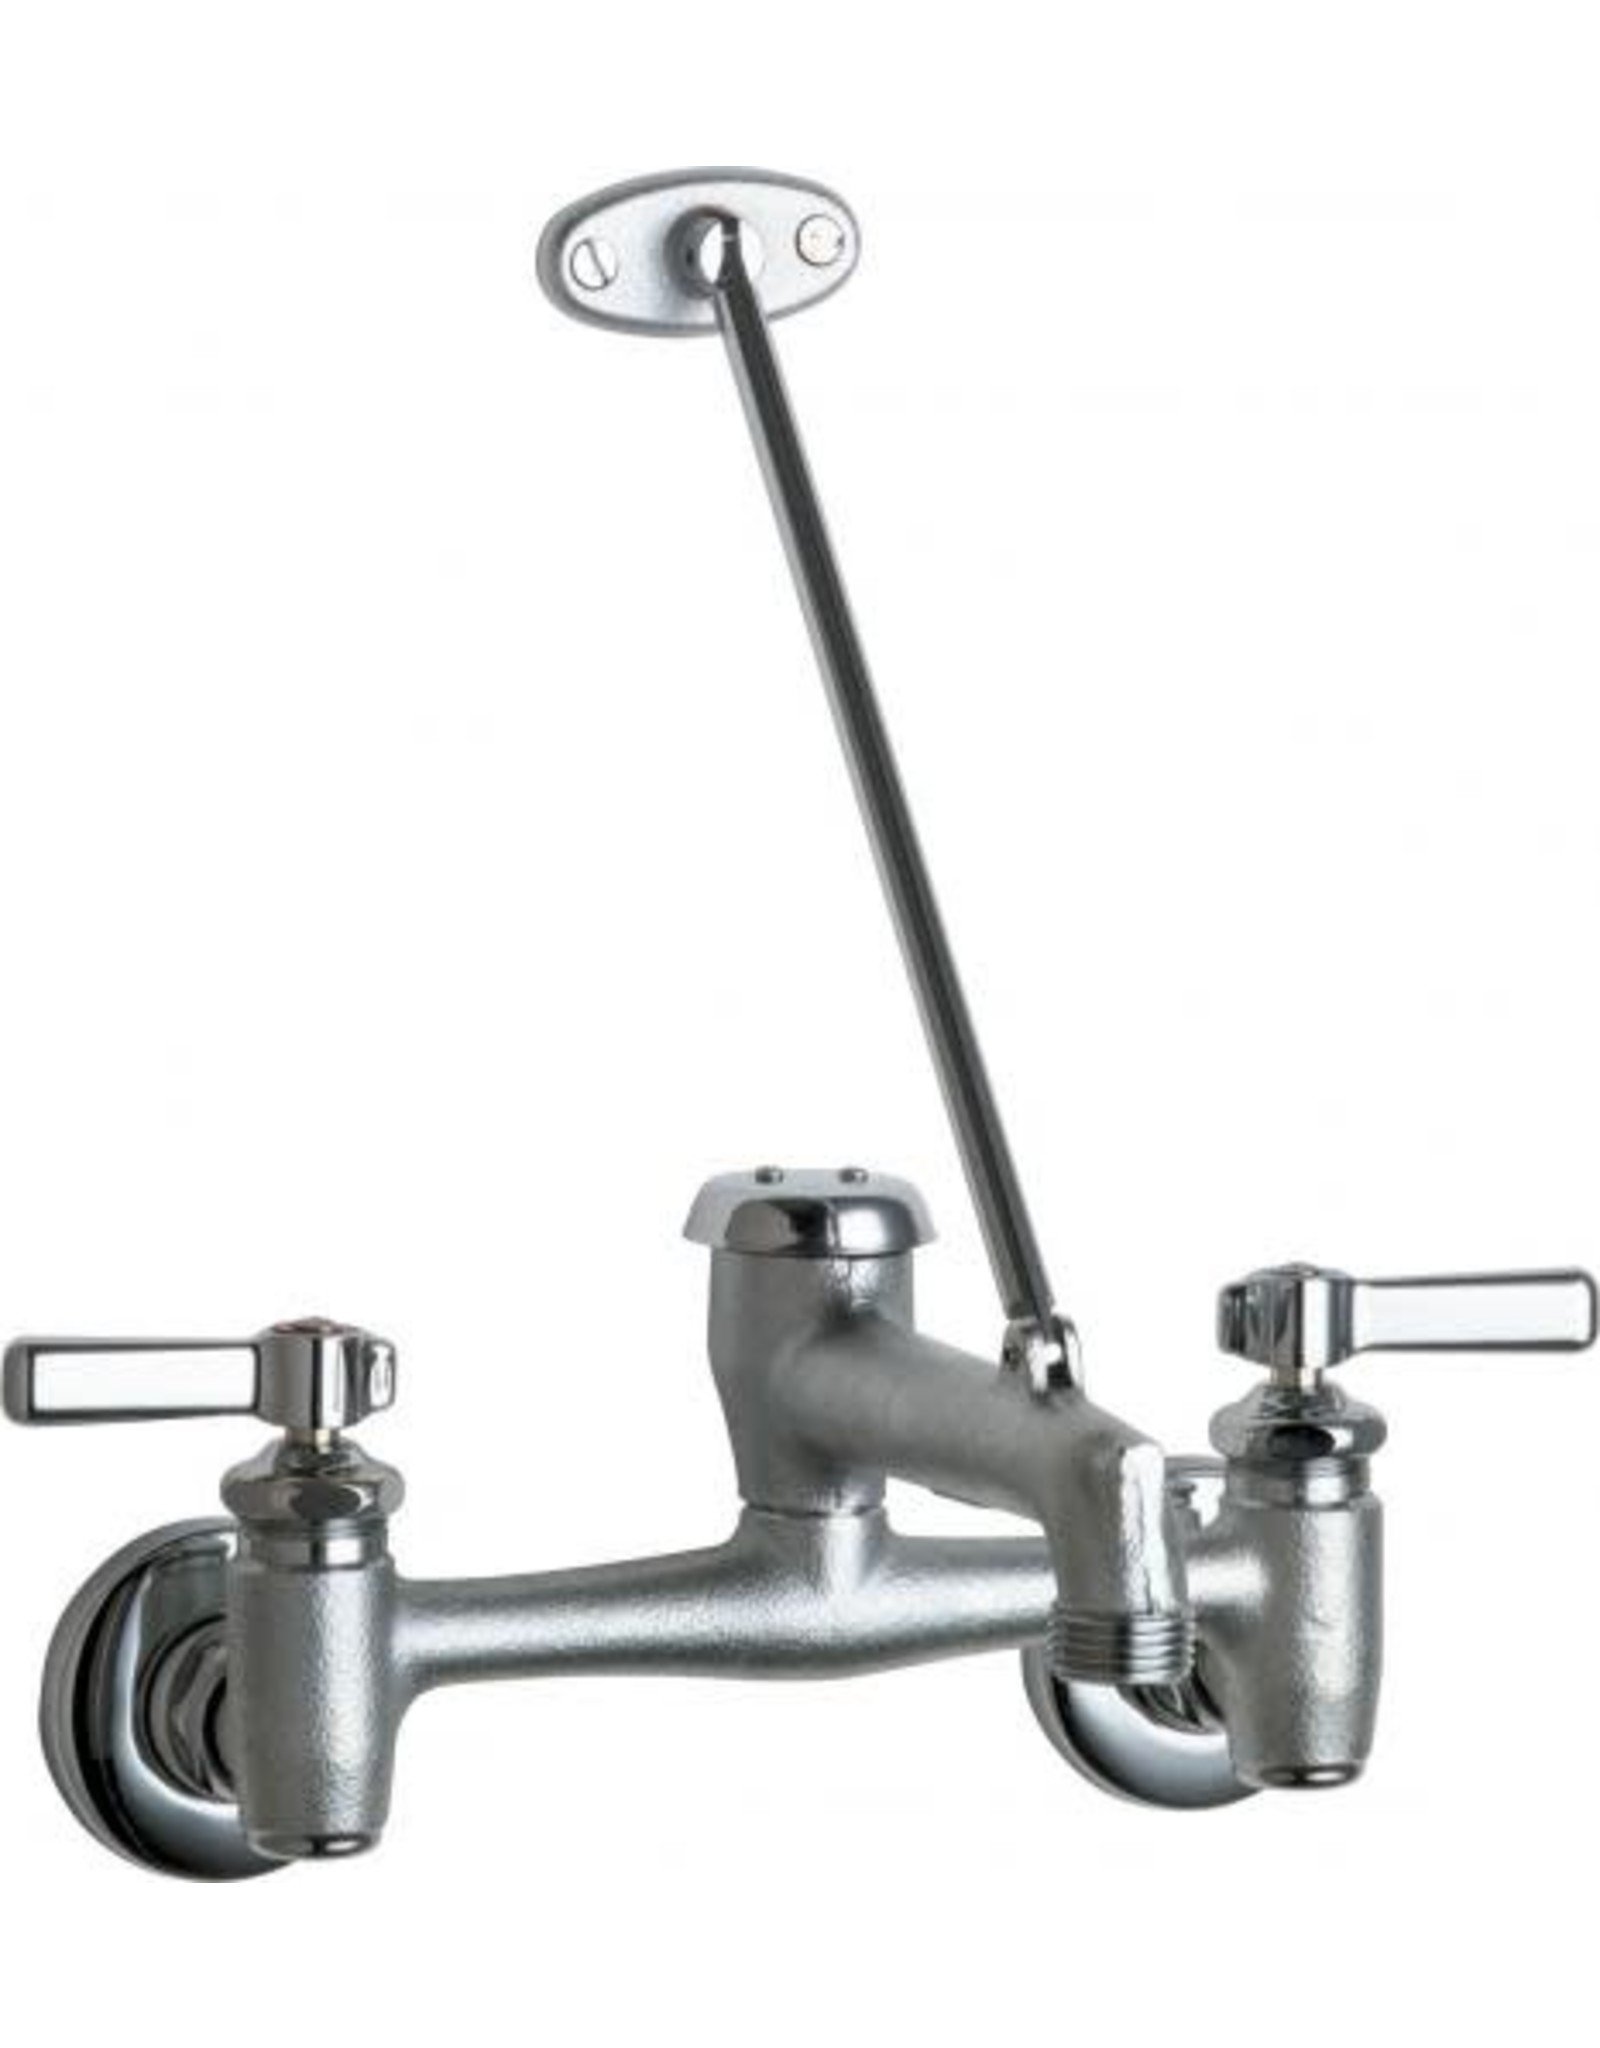 Chicago Faucets  Service Sink Faucet, Vac. Breaker, Hose Outlet, Intregal Stops, W/ SUPPORT BAR